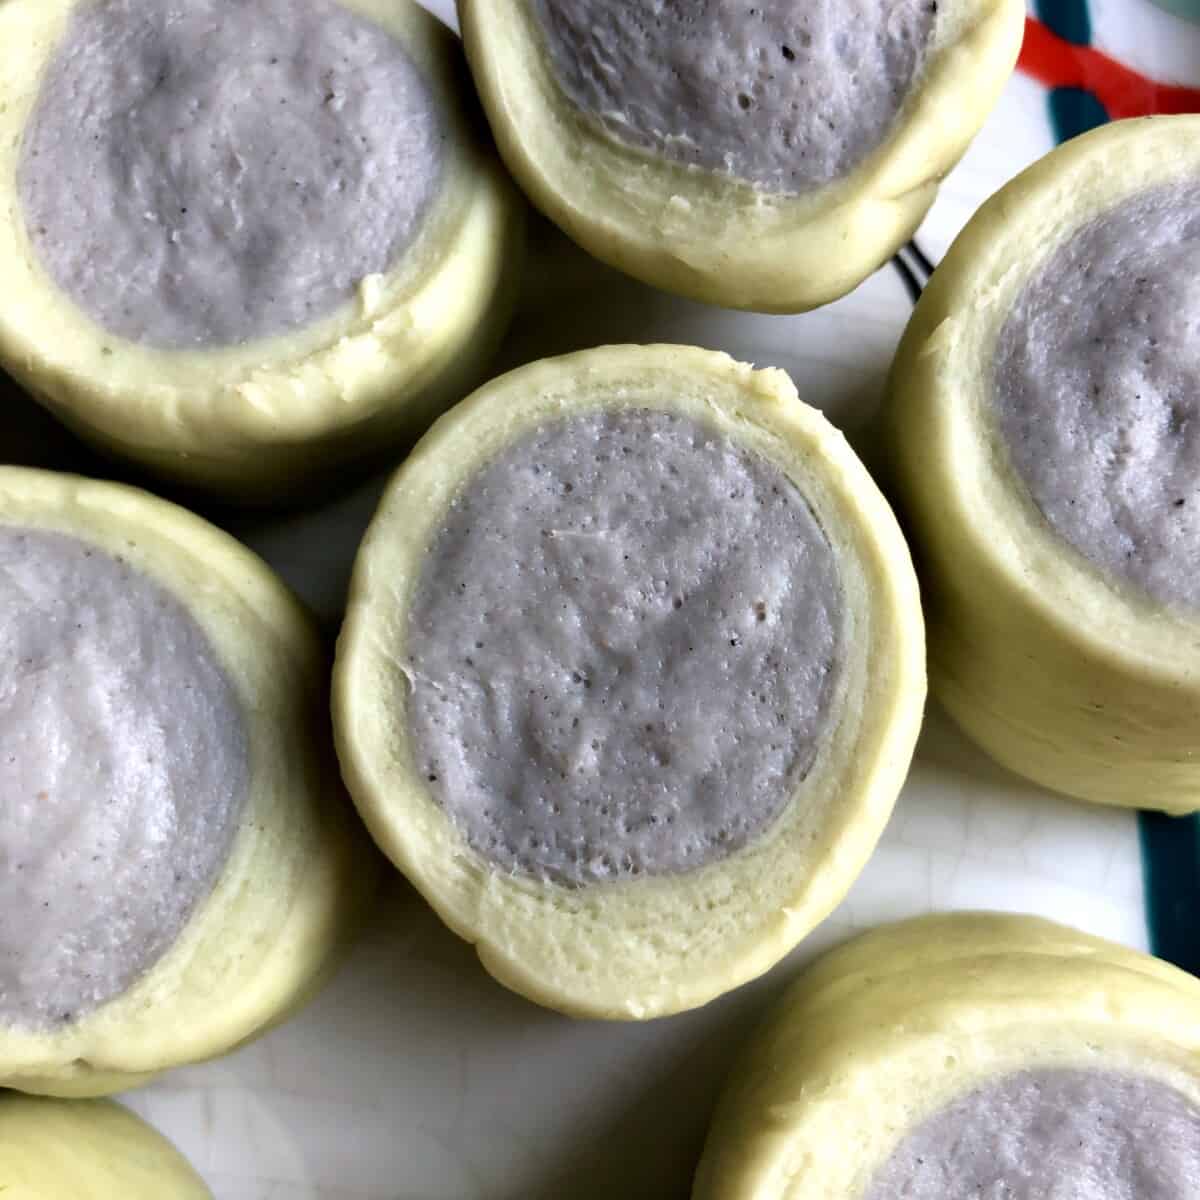 Homemade tie-dyed pork bun dough with a grey center surrounded by a pale green outer perimeter (just after being sliced from the "log" of dough and not yet formed or rolled out.